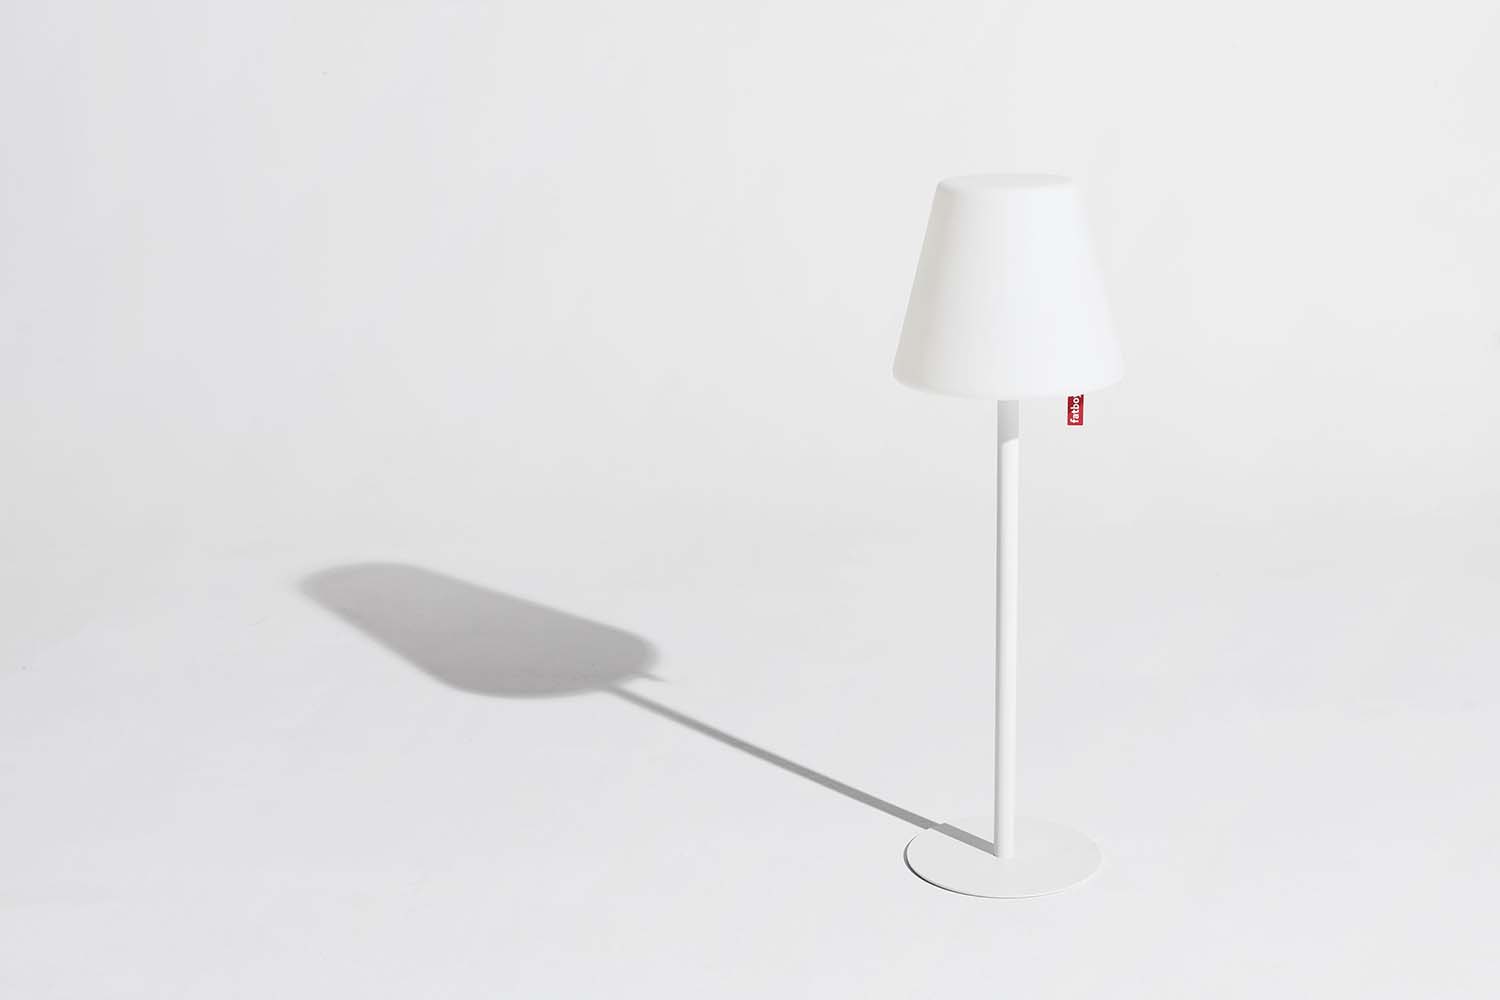 Fatboy, Edison The Giant LED Floor Lamp and Prêt Racket Solar Lamps